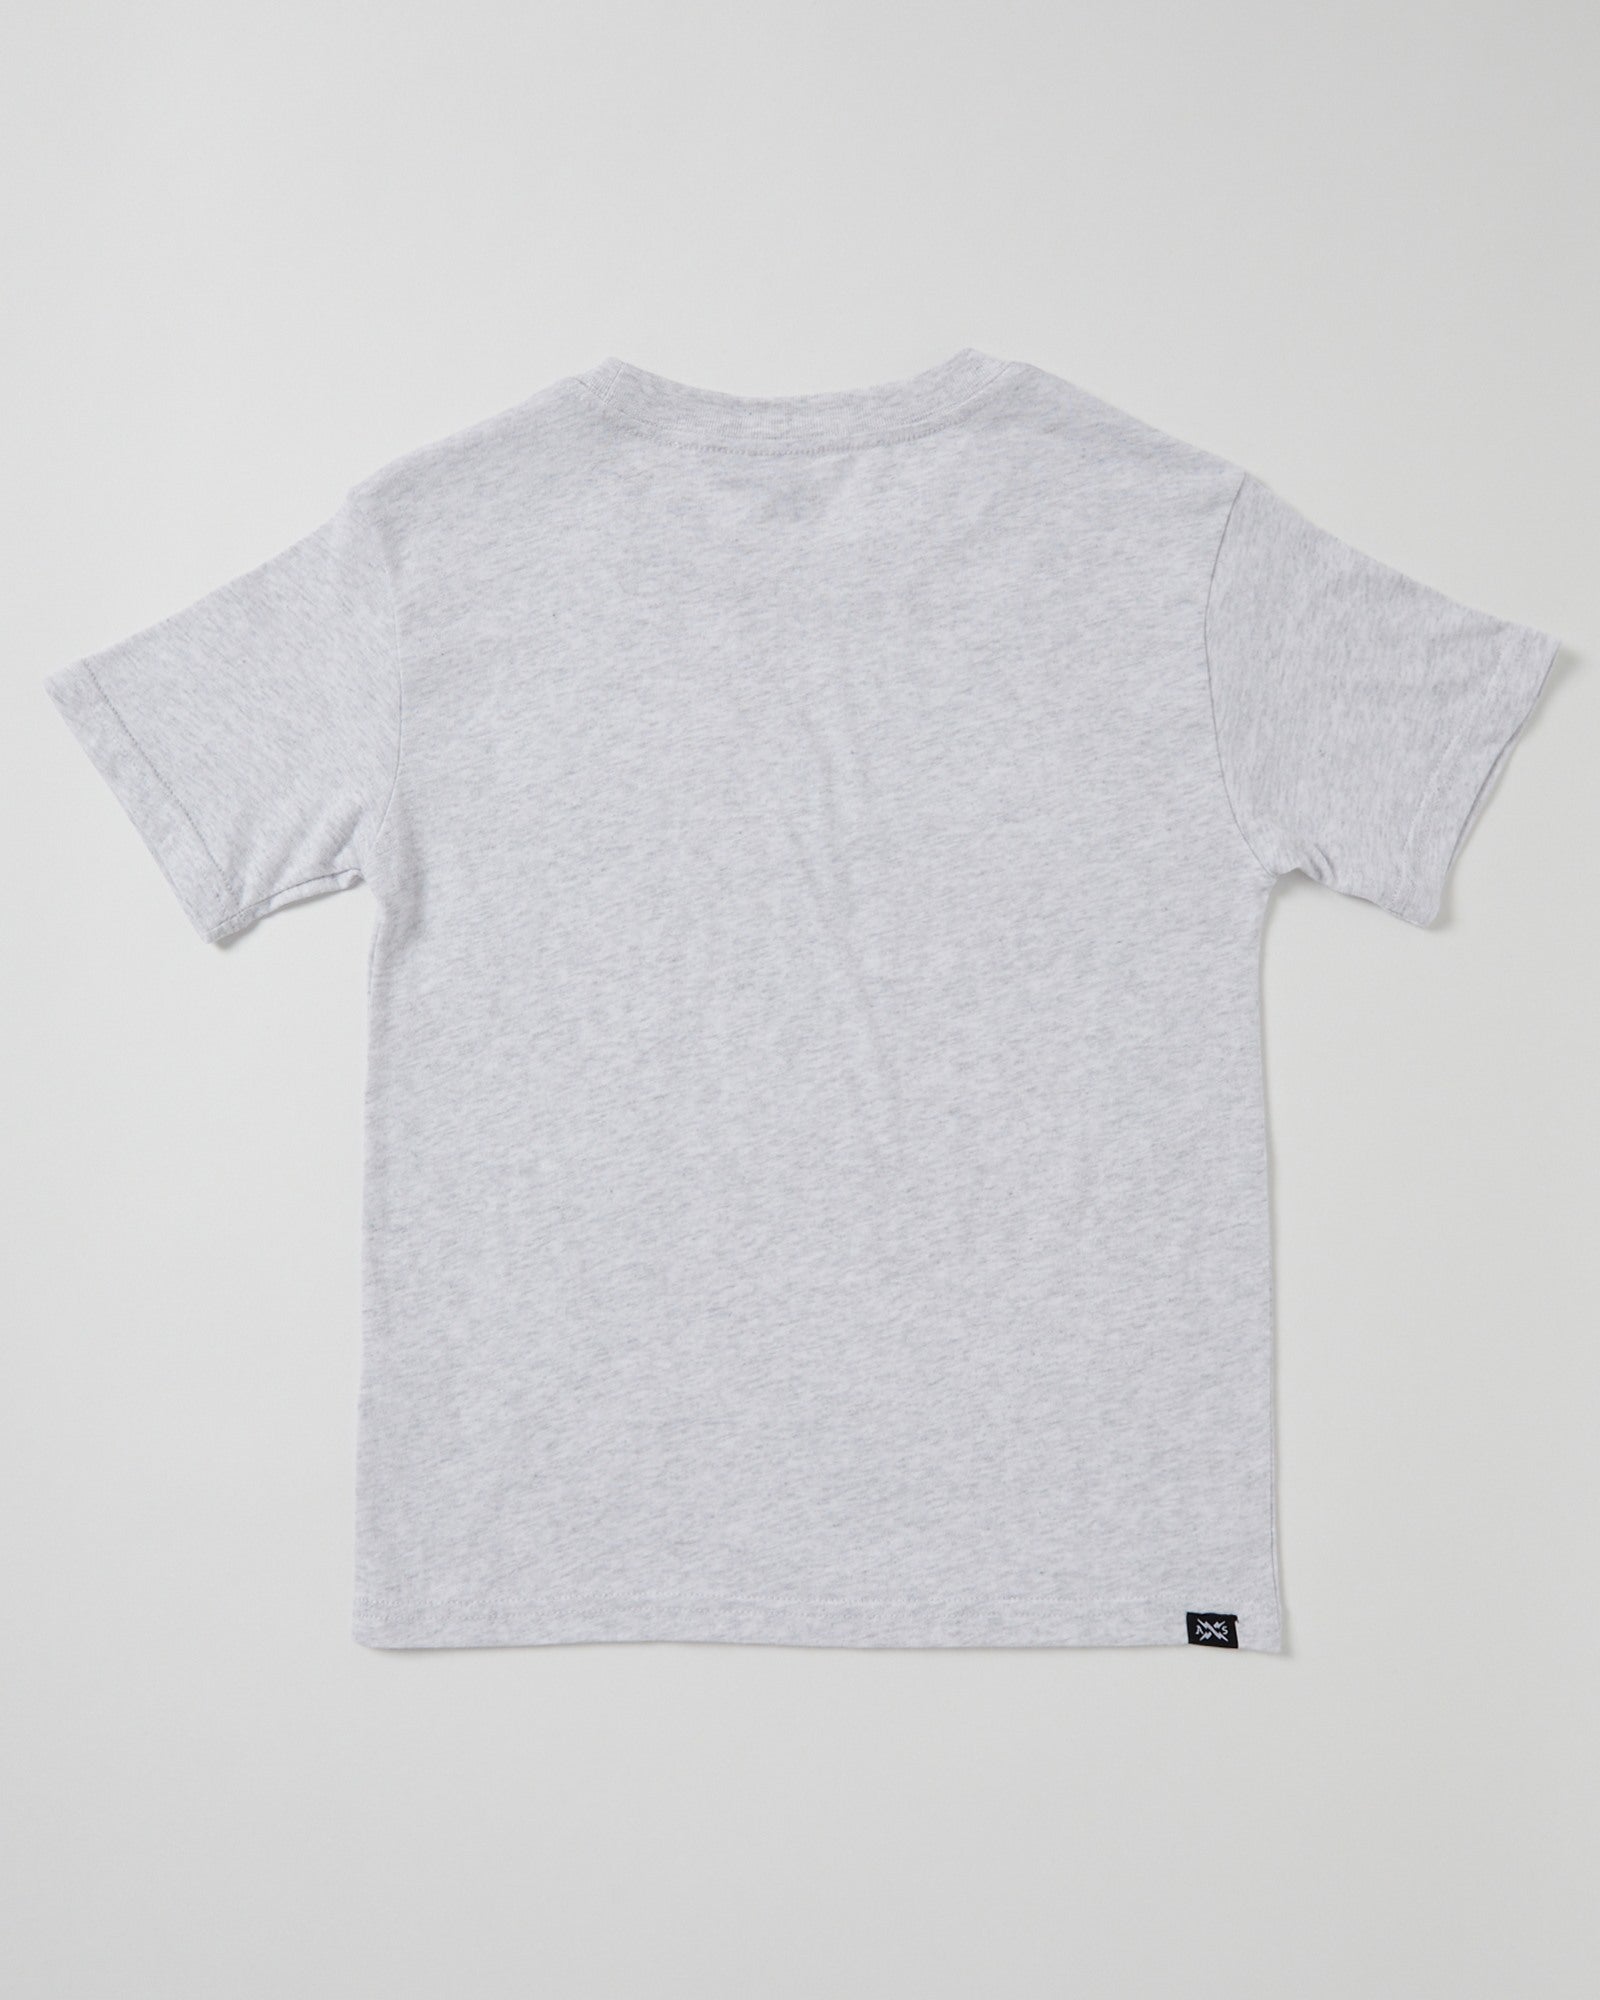 This Teen Boy Chill Short Sleeve Tee by Alphabet Soup is made of 100% grey marle cotton jersey and features a ribbed crew neckline, straight hemline, and short sleeves. The centred print on the chest adds a stylish touch.